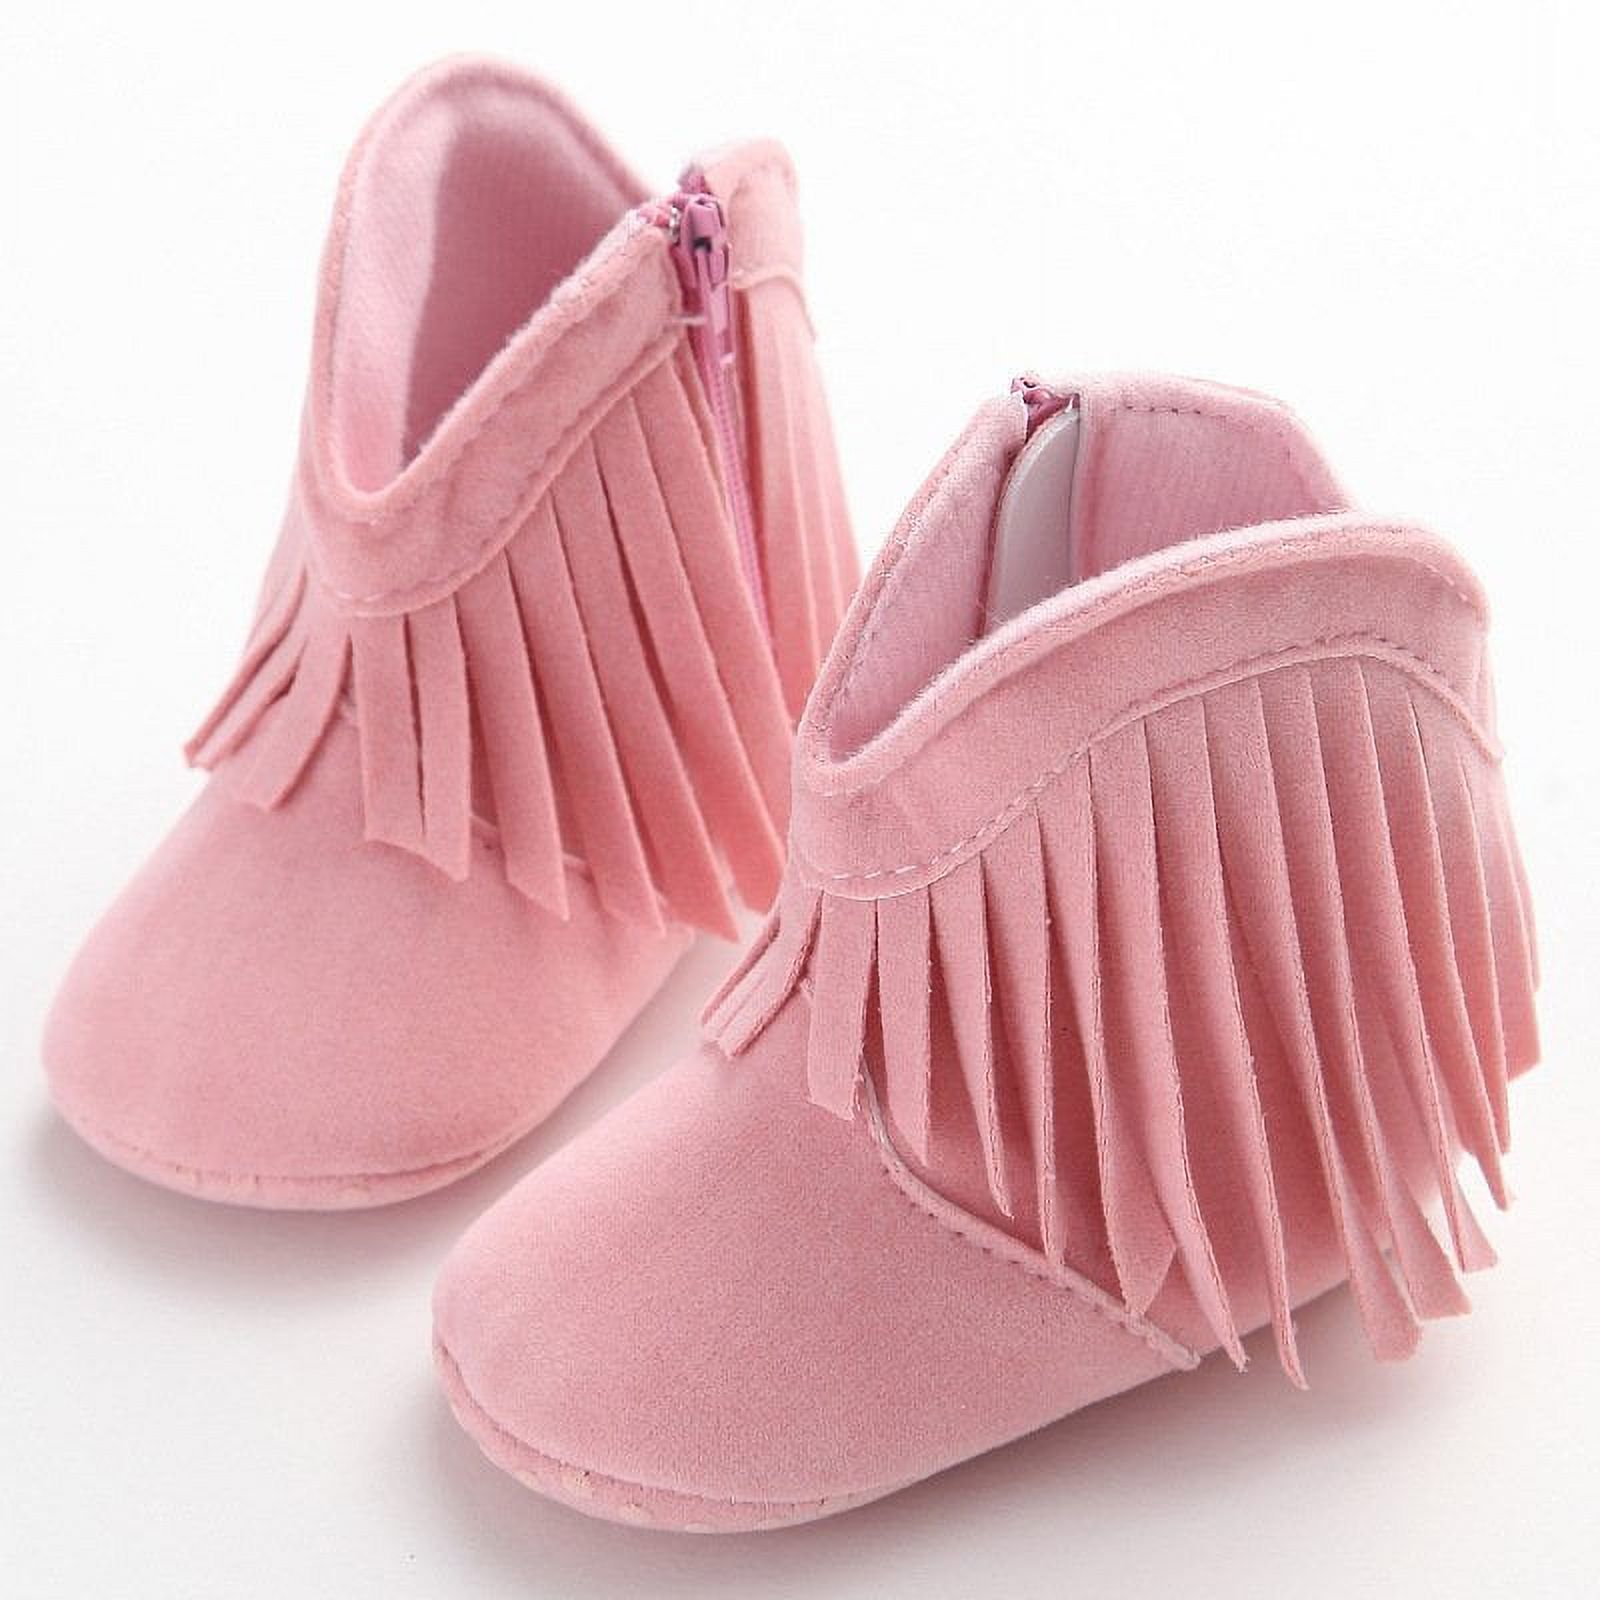 Newborn Toddler Tassel Boots Baby Infant Boy Girl Soft Soled Winter Shoes - image 1 of 6